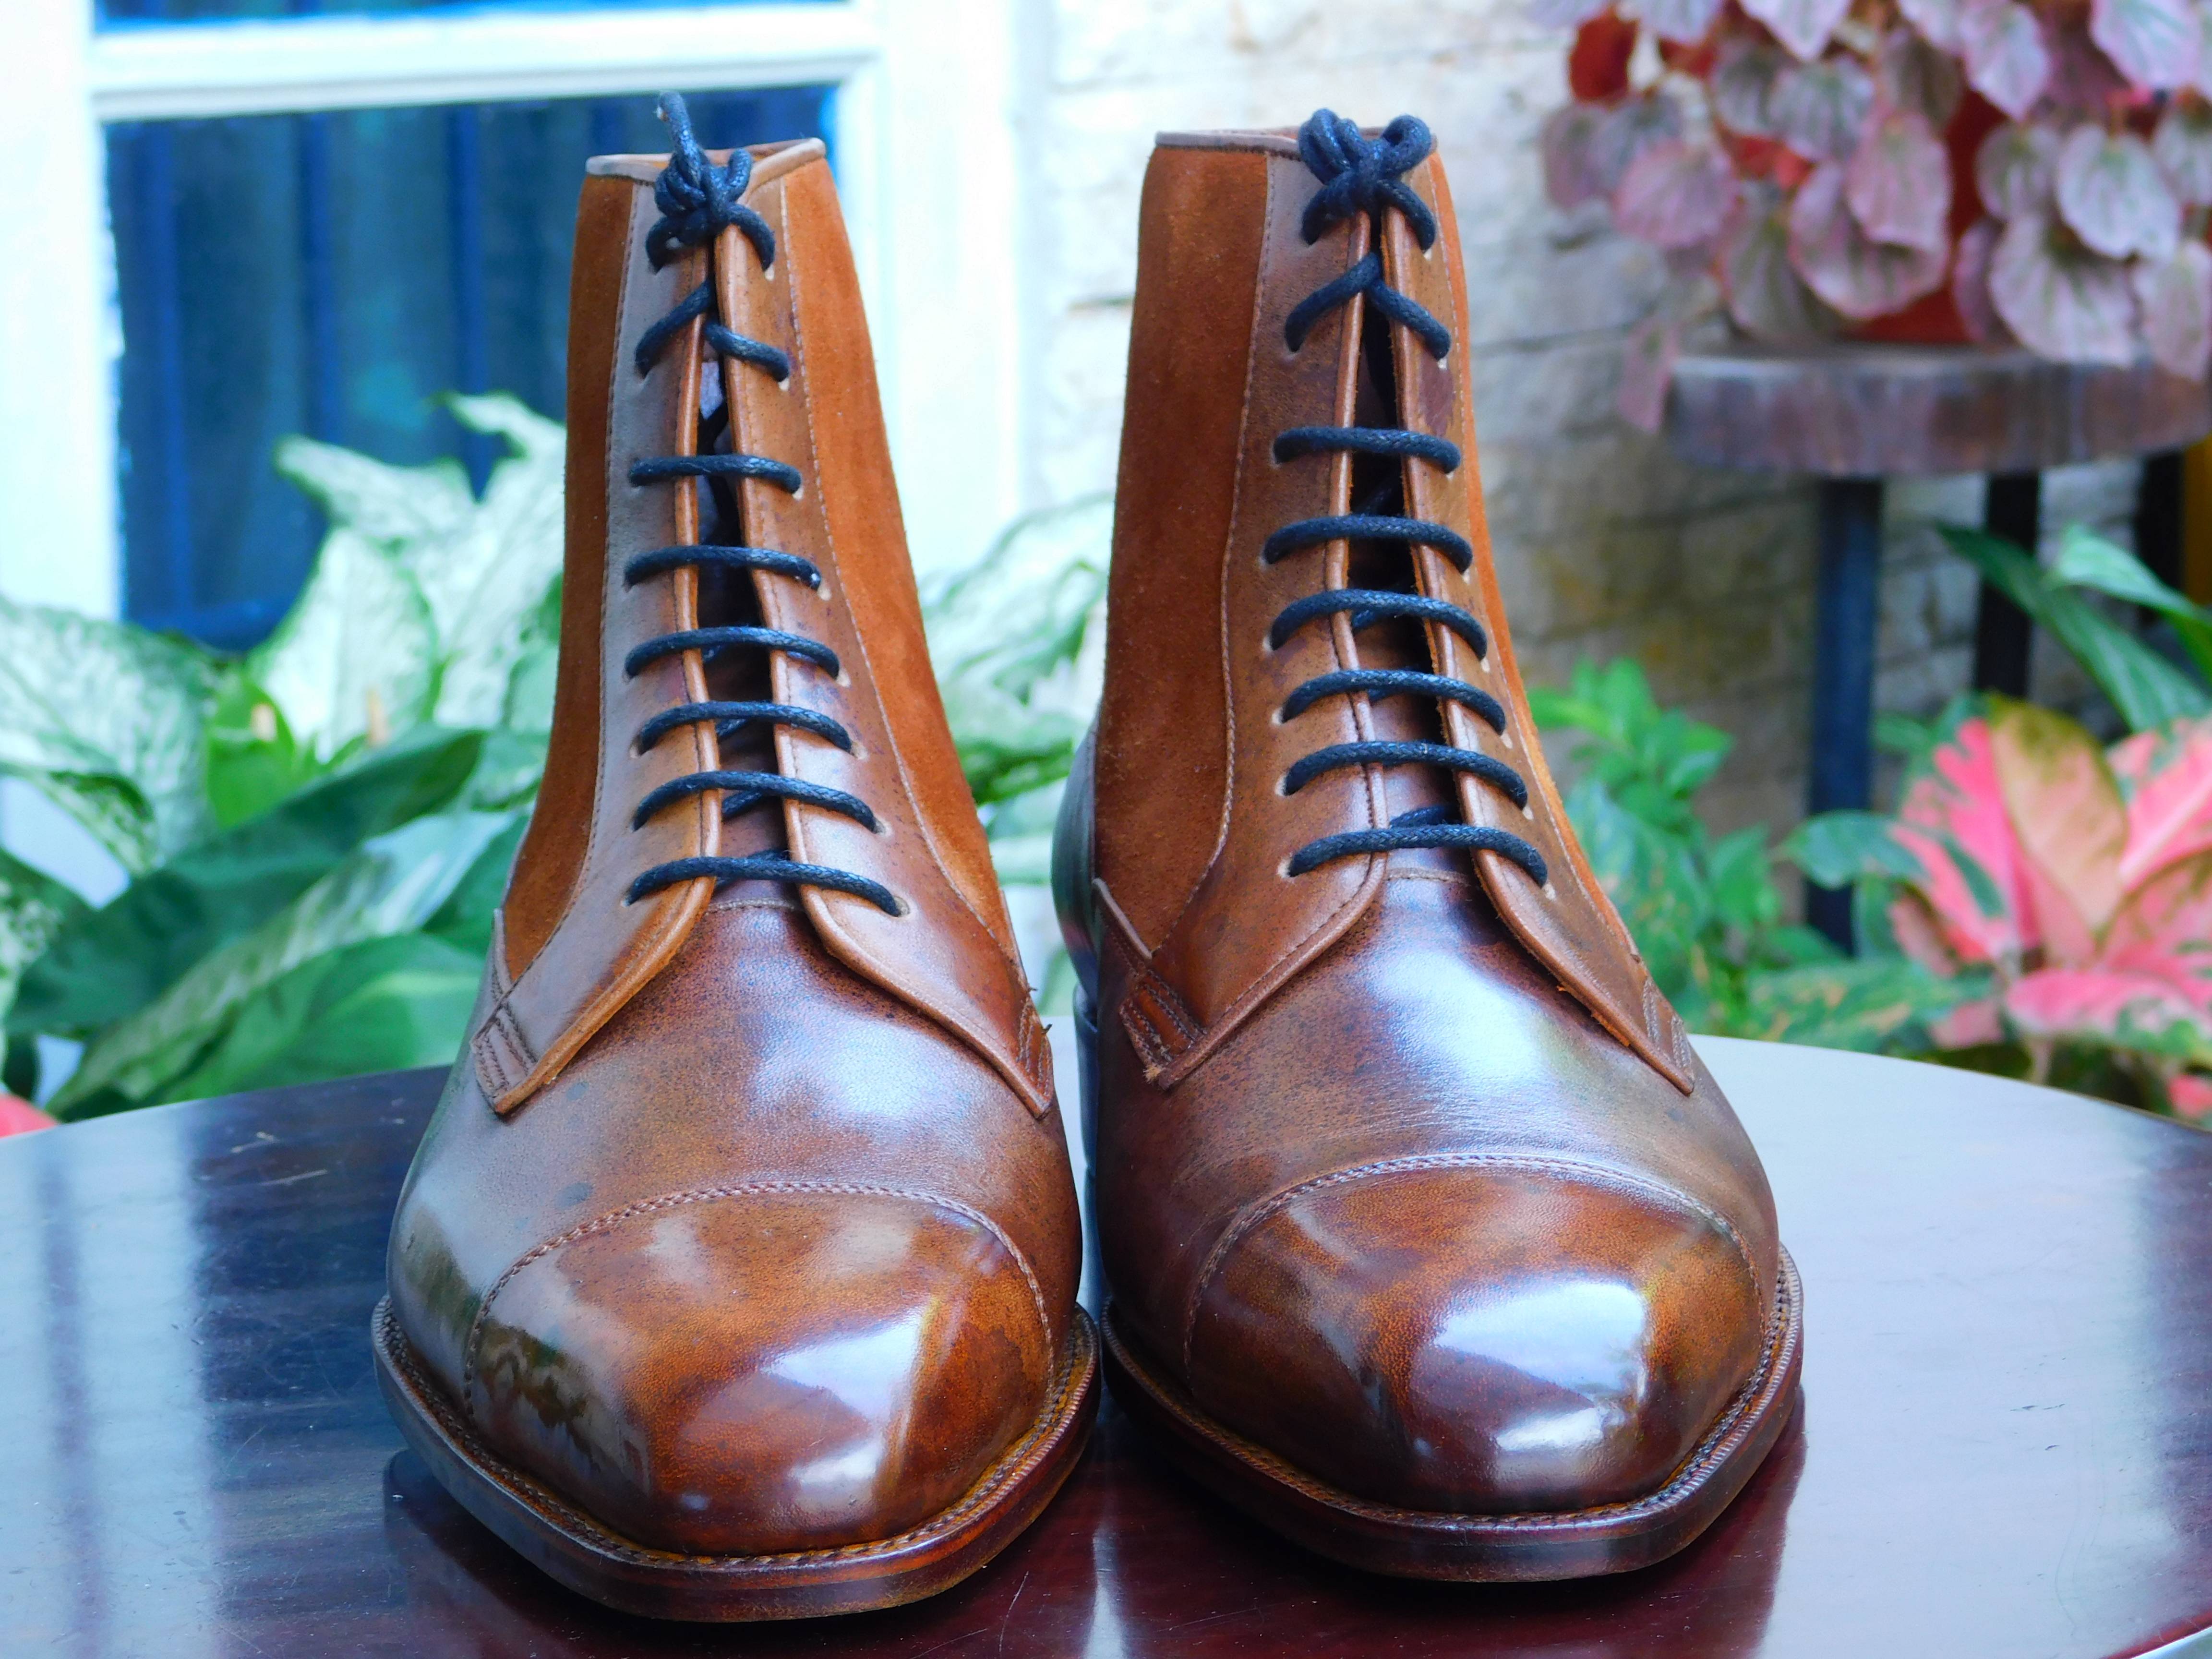 &#91;Initial Impression&#93; Winson Vanquish Blucher Boots, in Antique Sained Crust Leather.